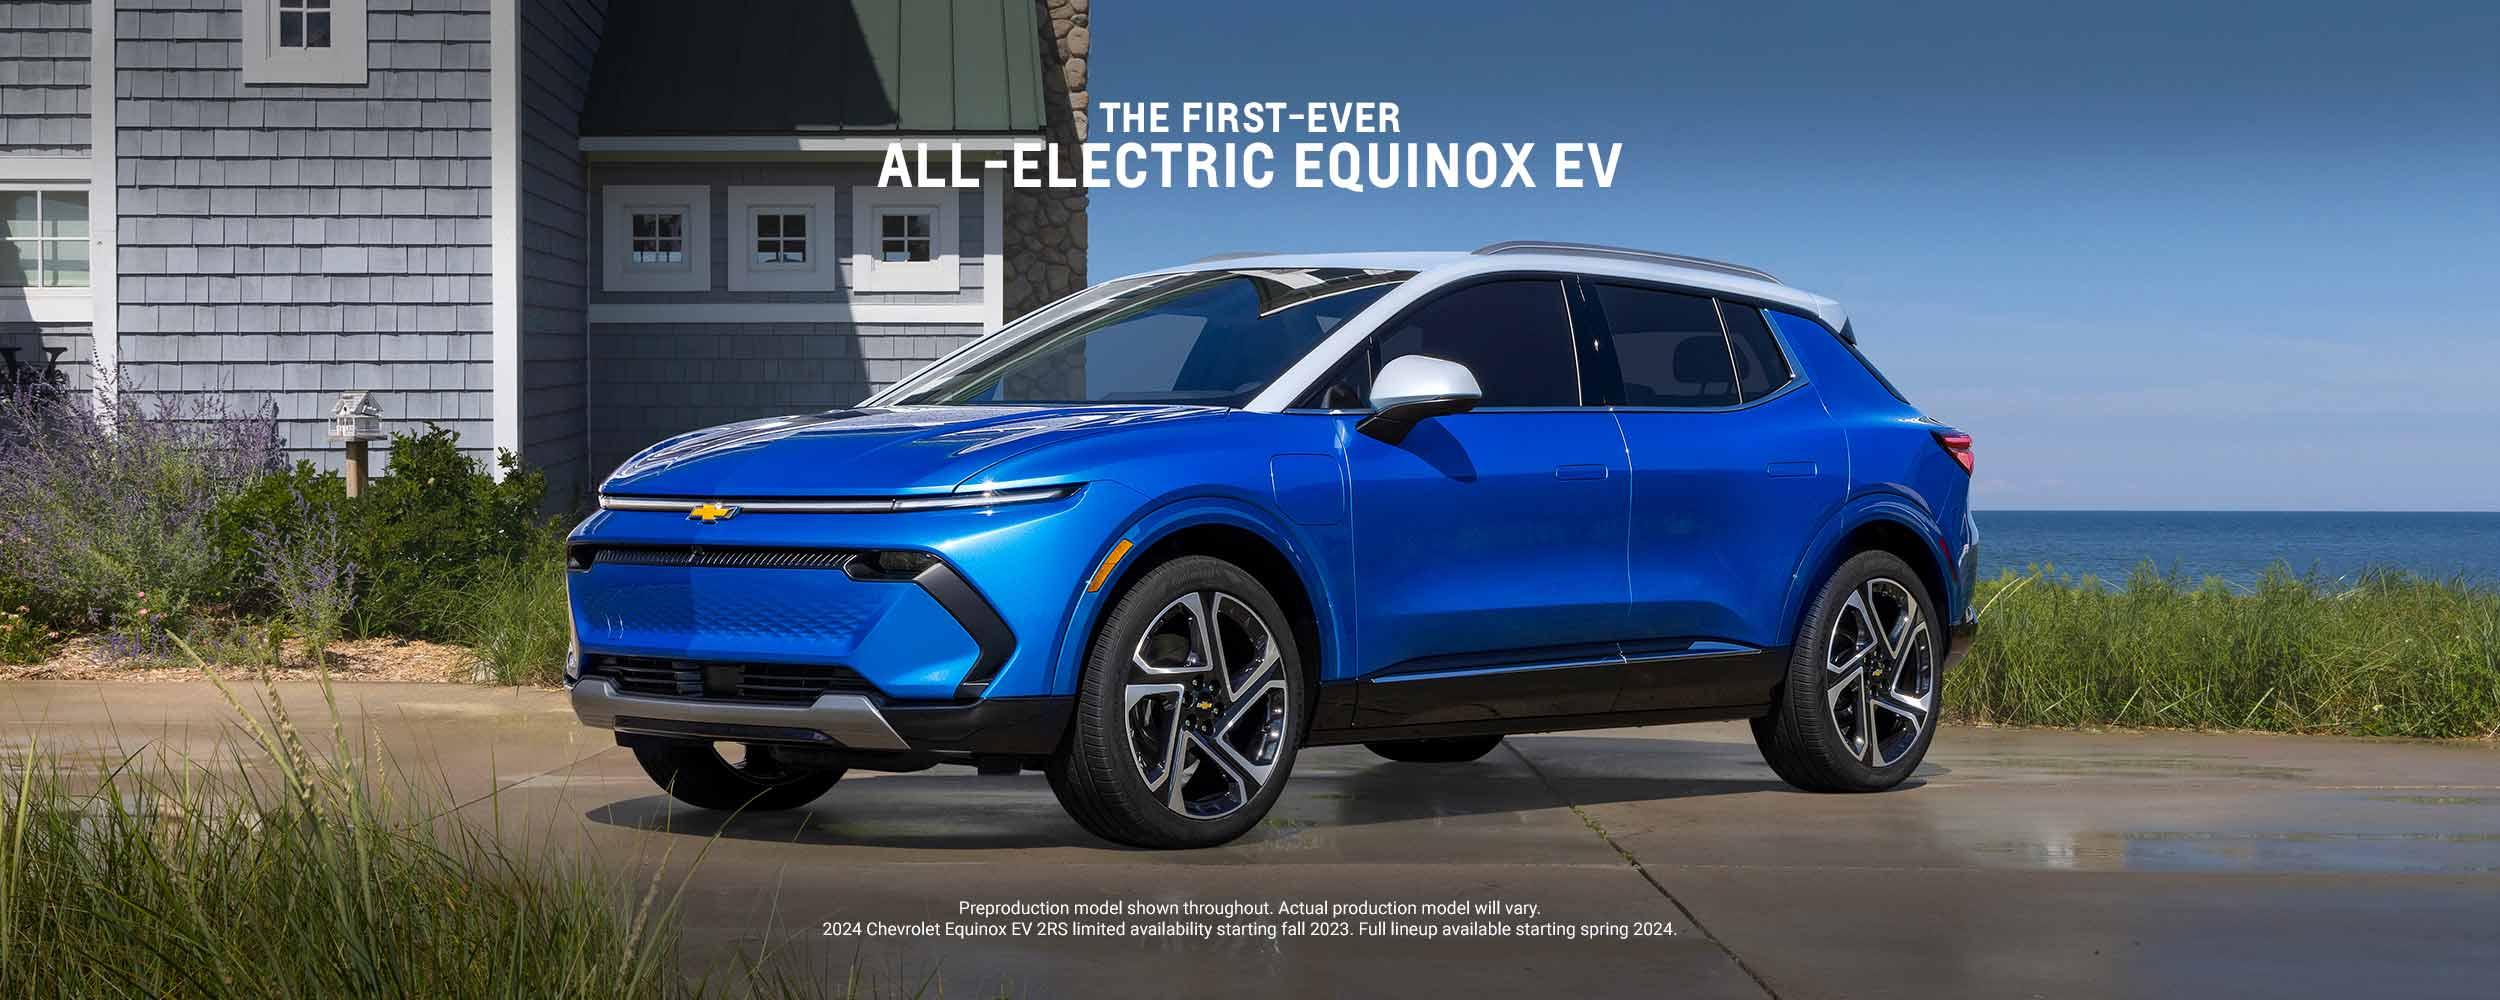 THE FIRST-EVER ALL-ELECTRIC EQUINOX EV